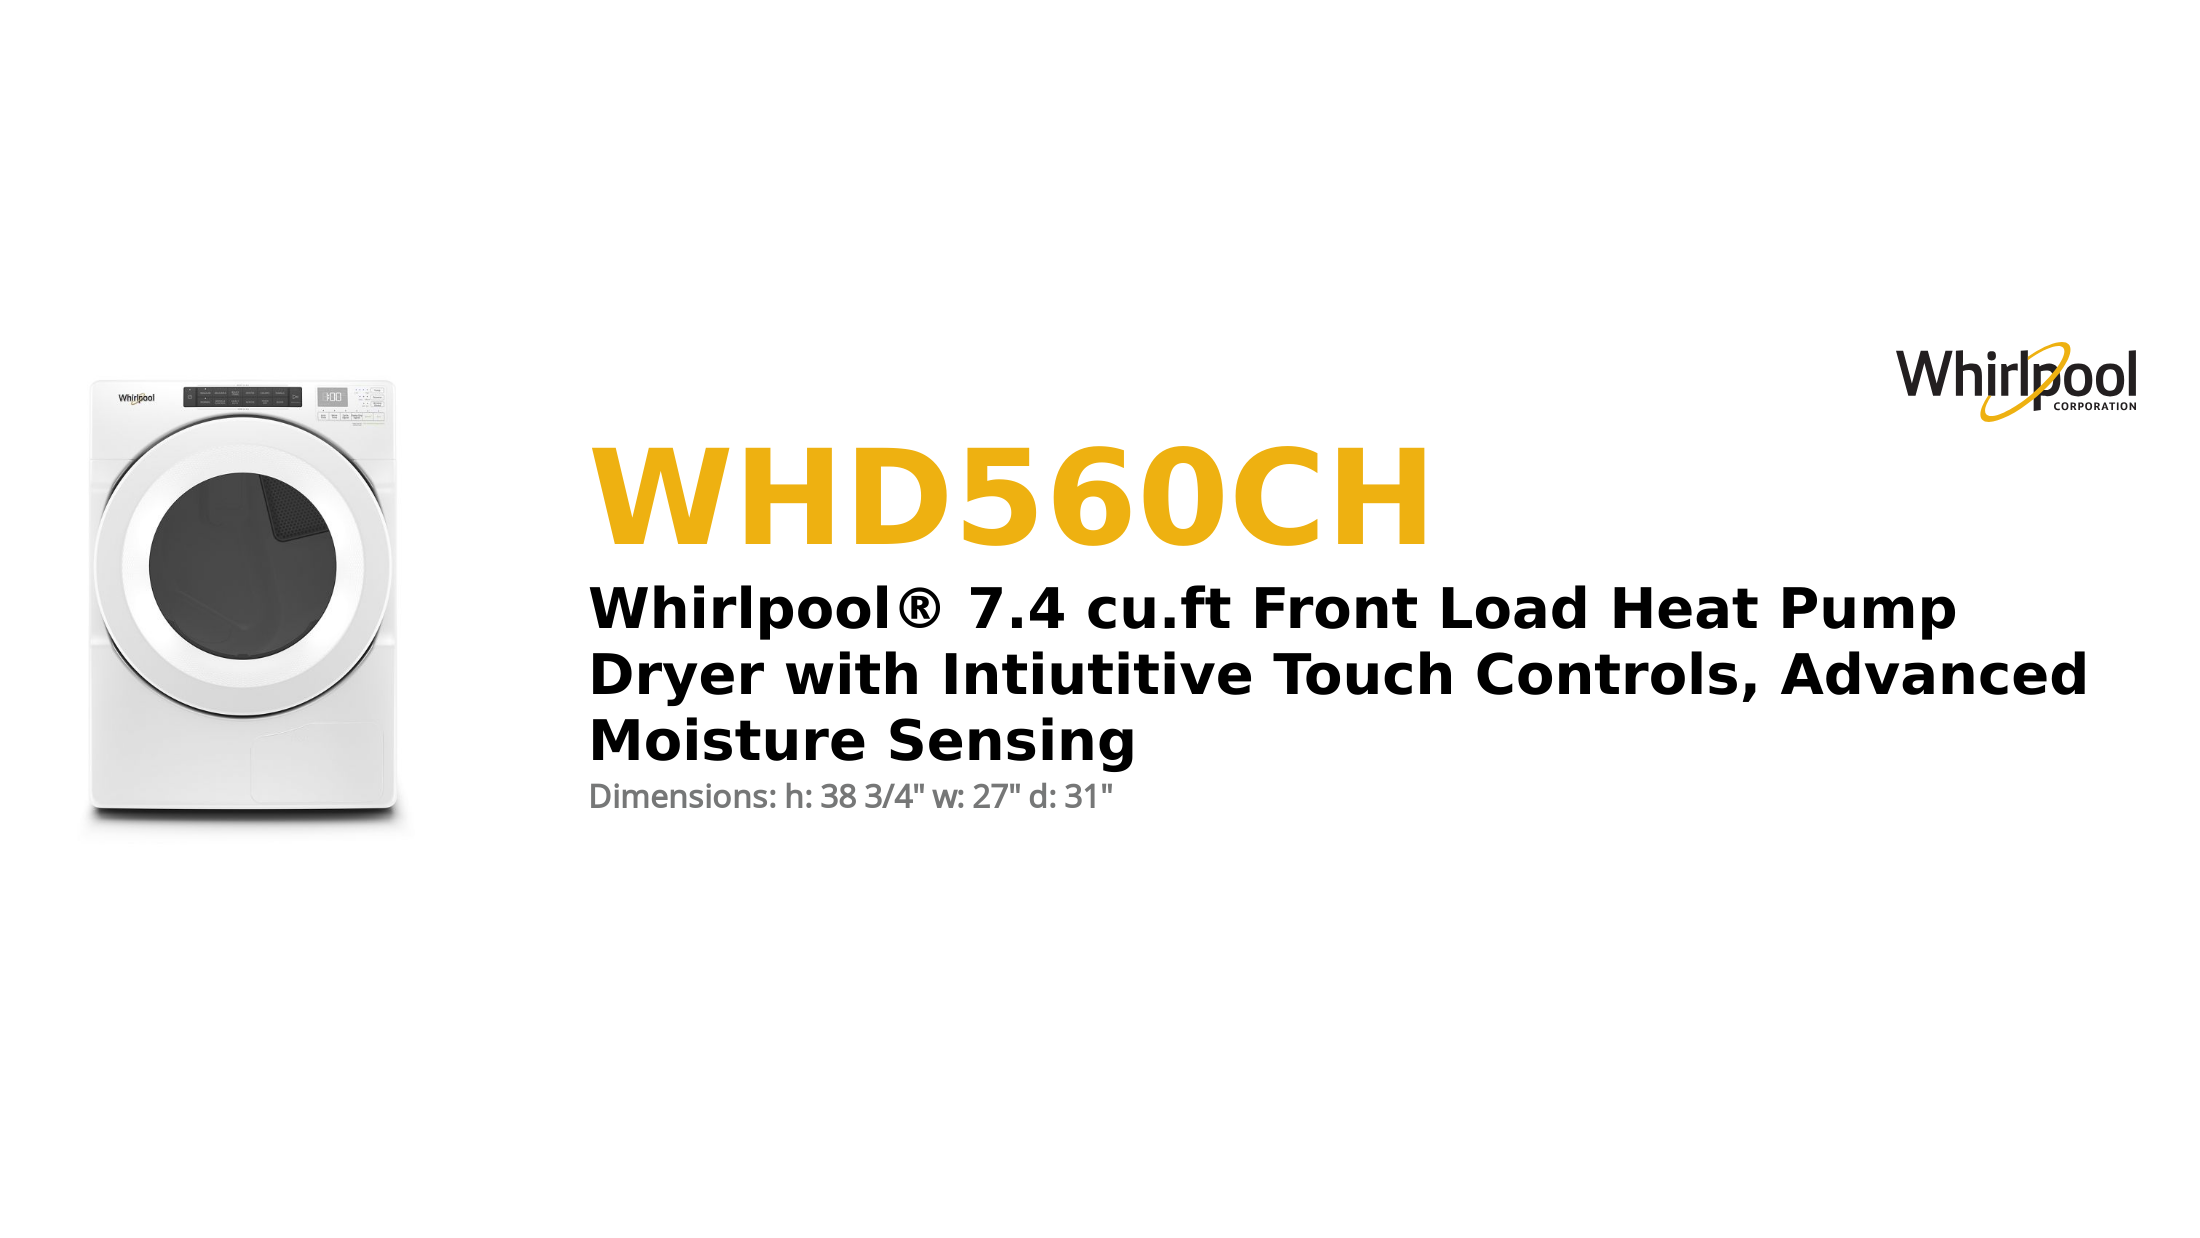 WHD560CH Product Brief